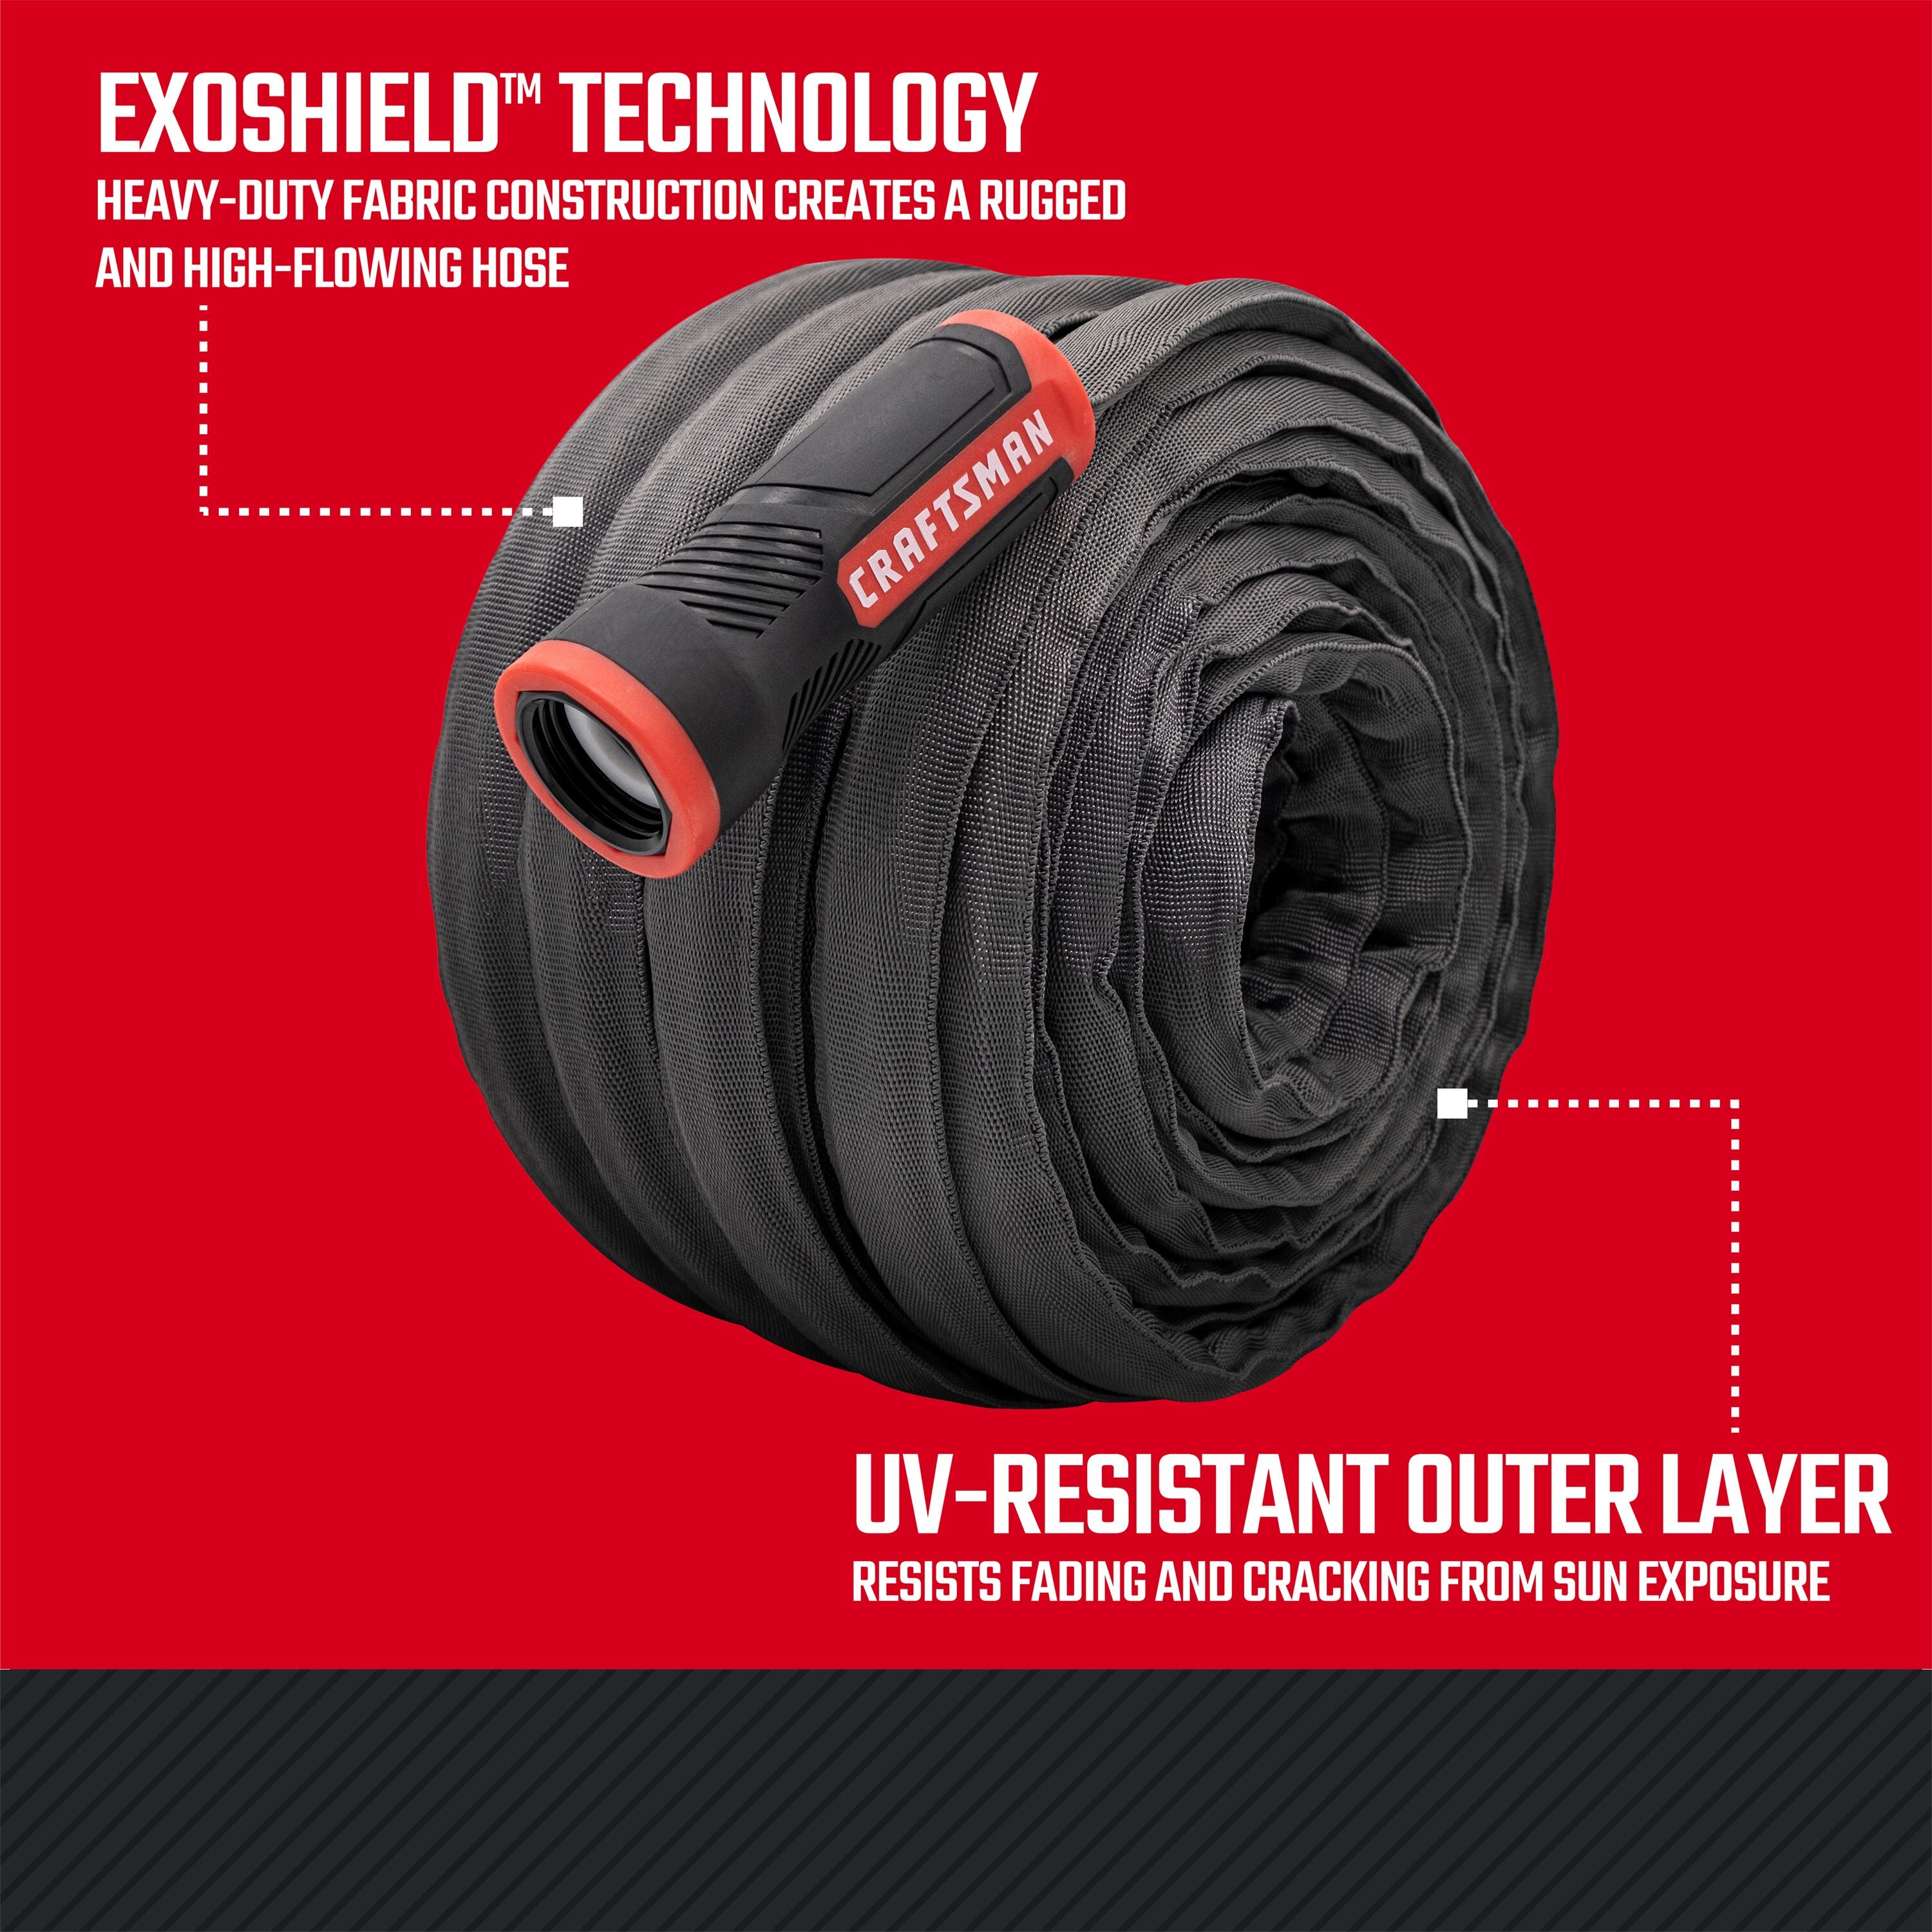 Black and red craftsman heavy-duty fabric hose, 100-foot by 5/8 inch. Featuring UV-resistant exoshield technology graphic